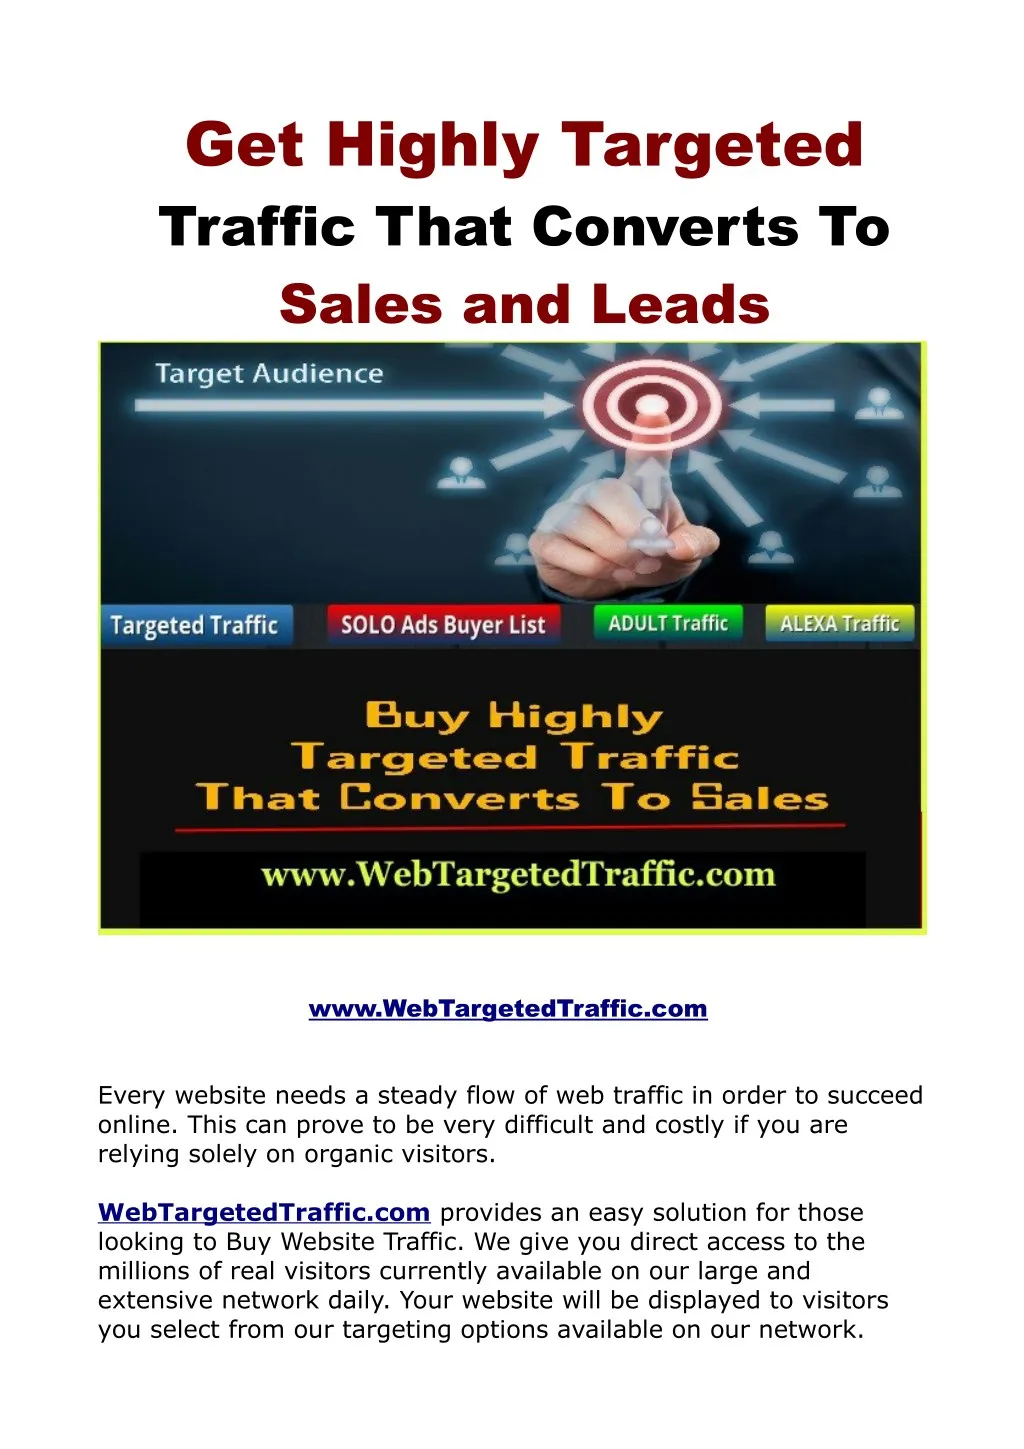 get highly targeted traffic that converts